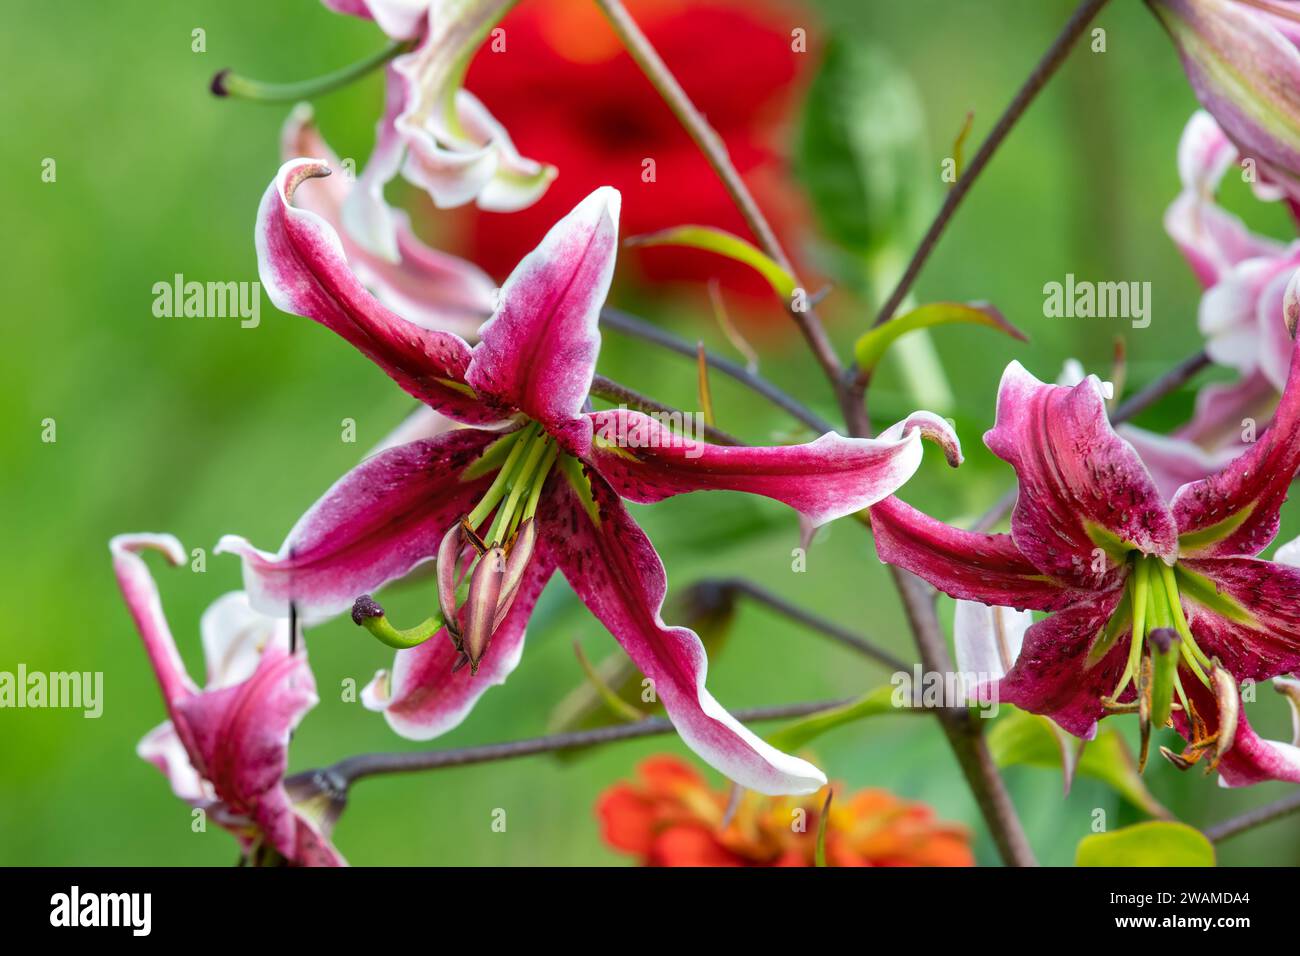 Close up of Japanese lilies (lilium speciosum) flowers in bloom Stock Photo